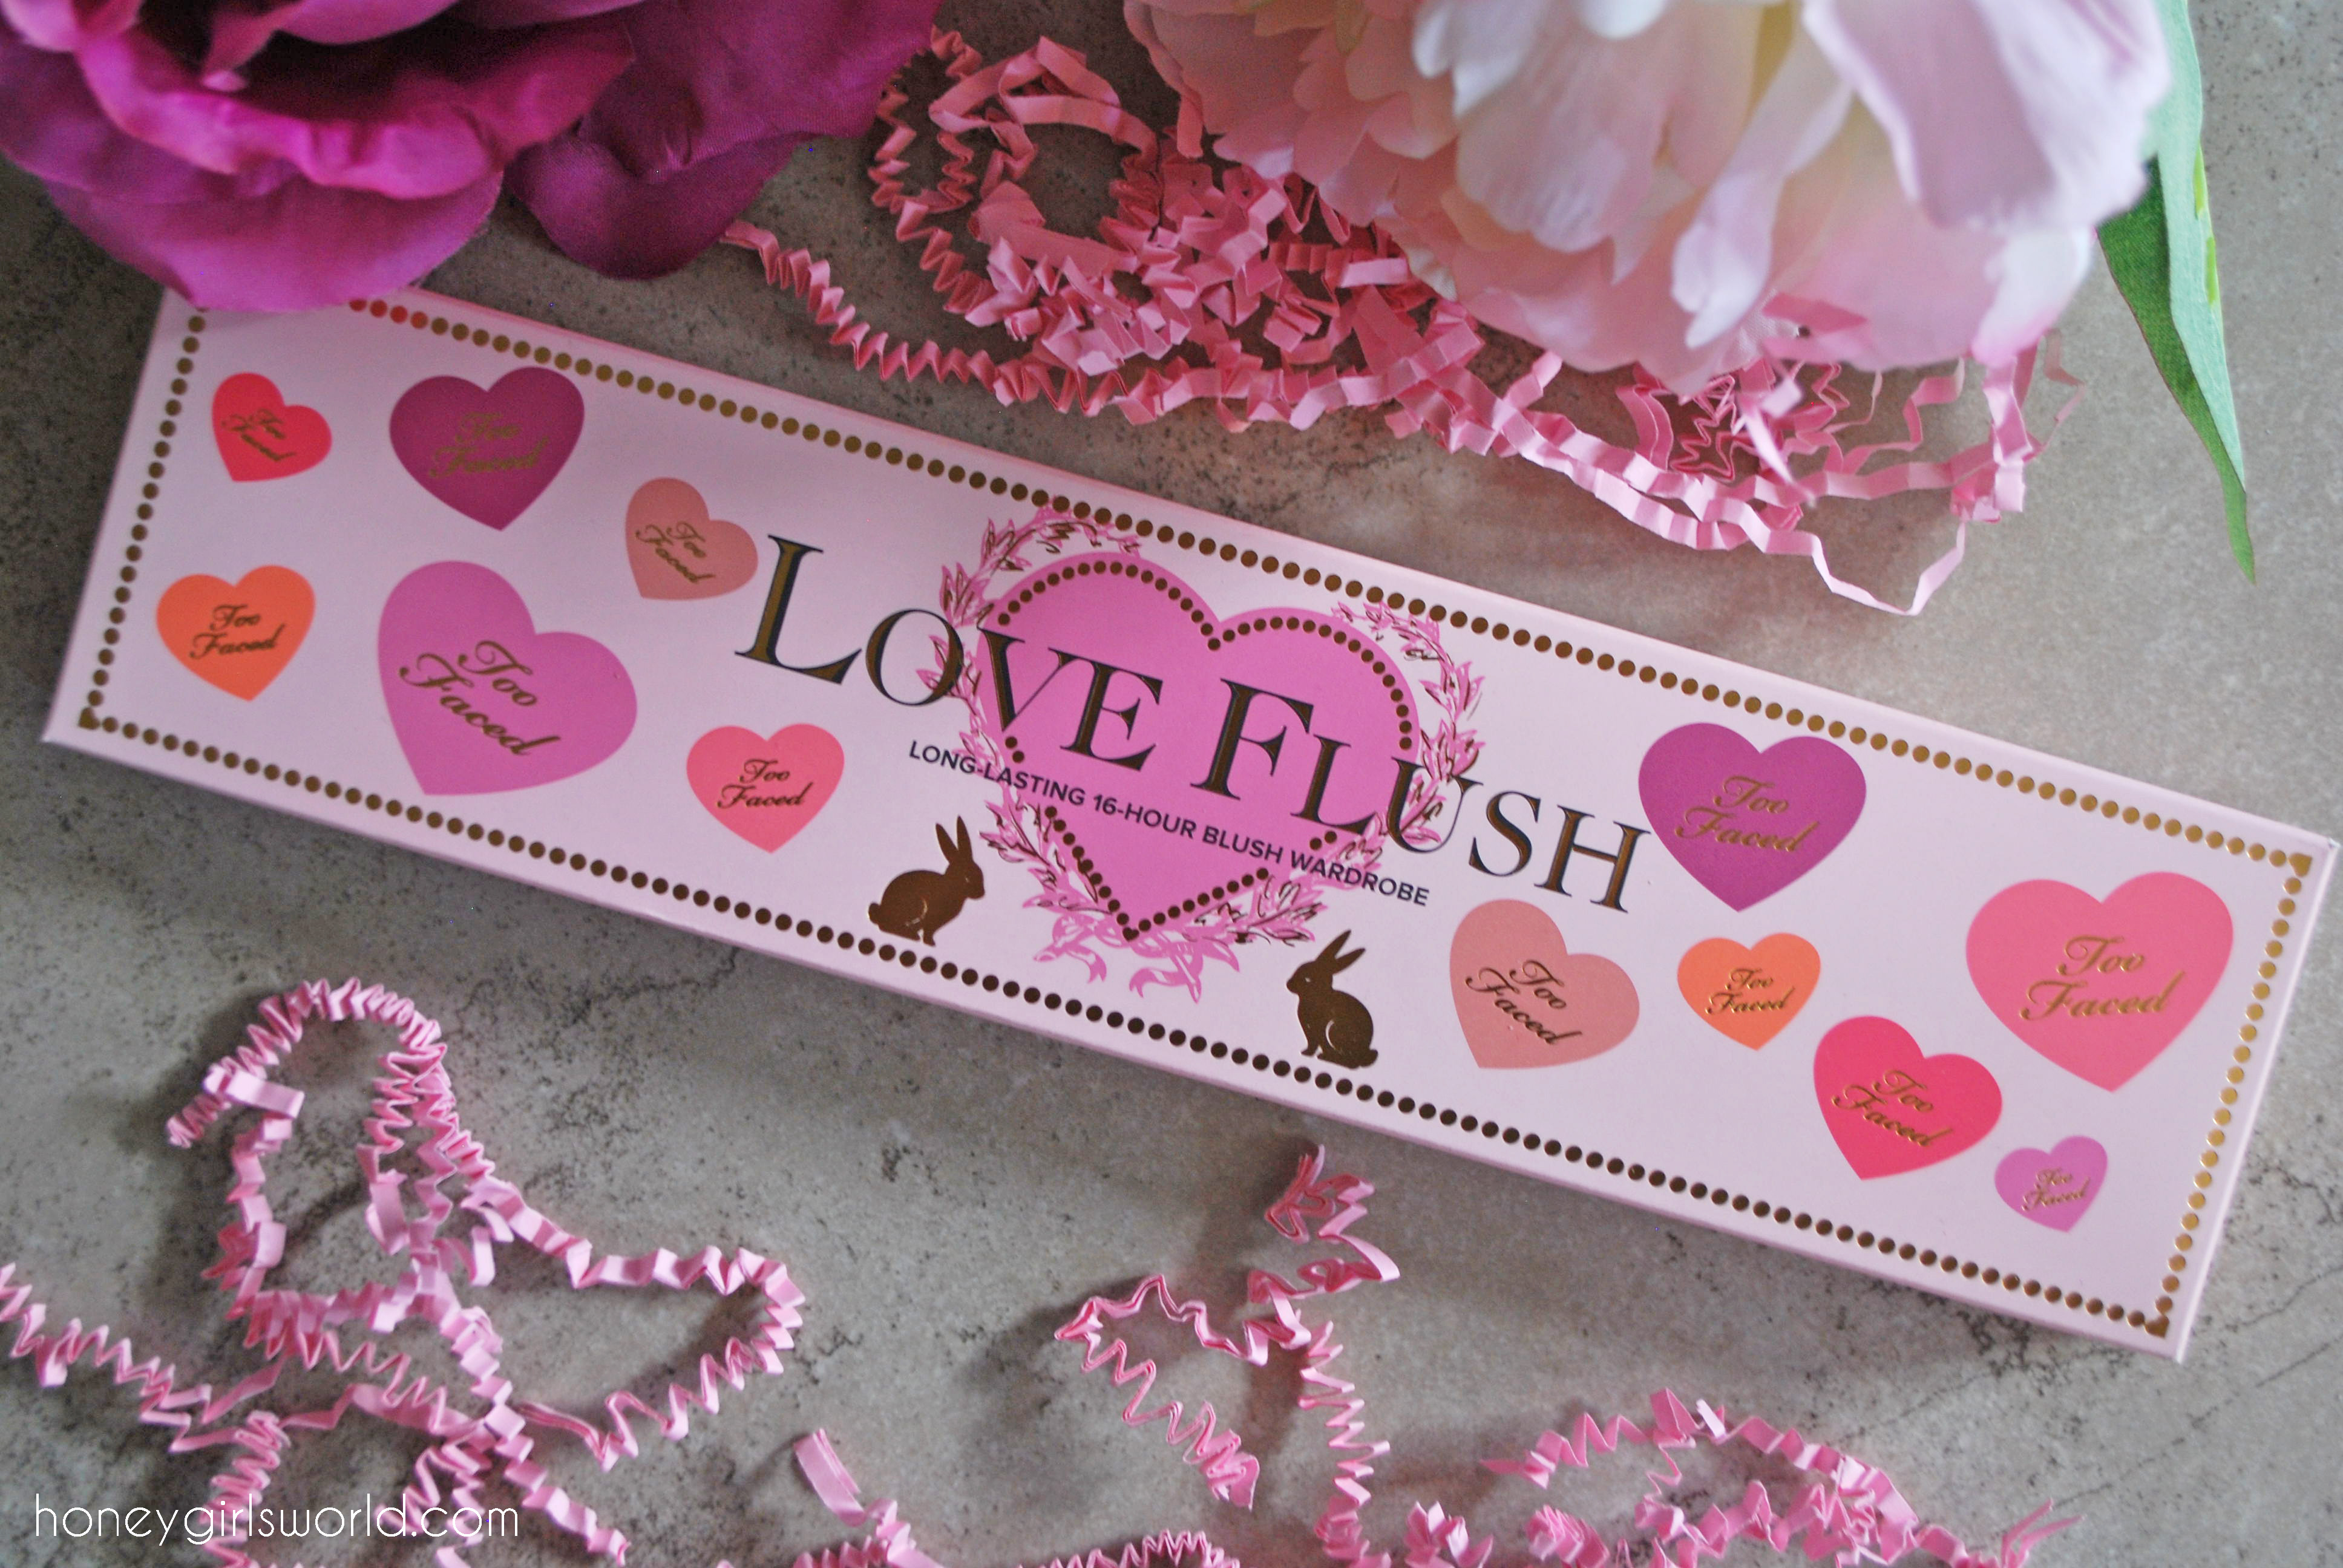 Too Faced Love Flush Blush, Too Faced Love Flush blush wardrobe, blush palette, swatches, review, too faced, cosmetics, makeup, blush, face products, cheeks, product review, beauty,